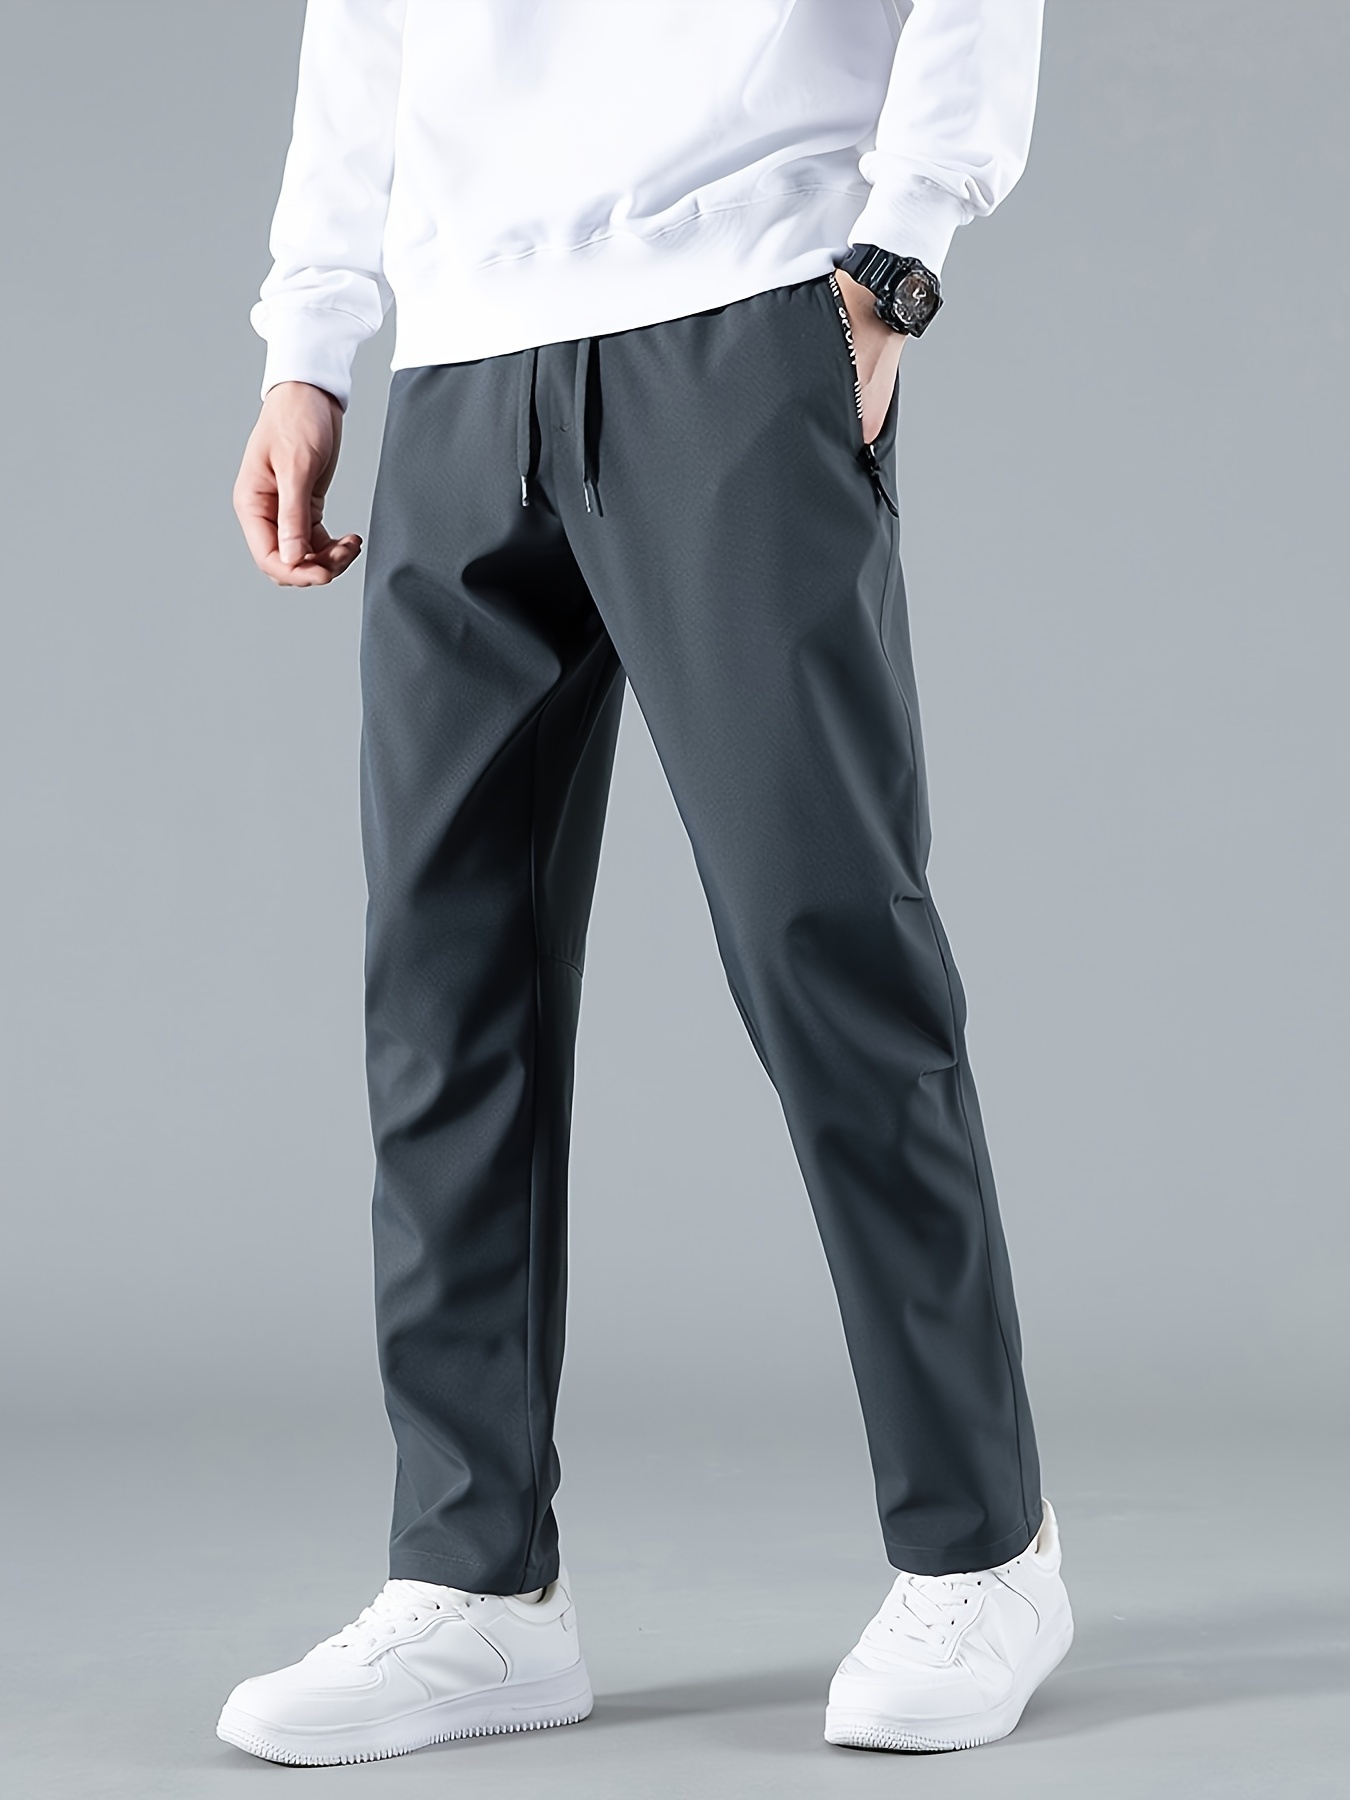 Mens Solid Comfort Sweat Pants - Regular Fit, Cuffed & Drawstring - Zippered Pockets for Secure Storage - Stylish, Durable, All-Occasion Casual Pants - Perfect for Outdoor Adventures